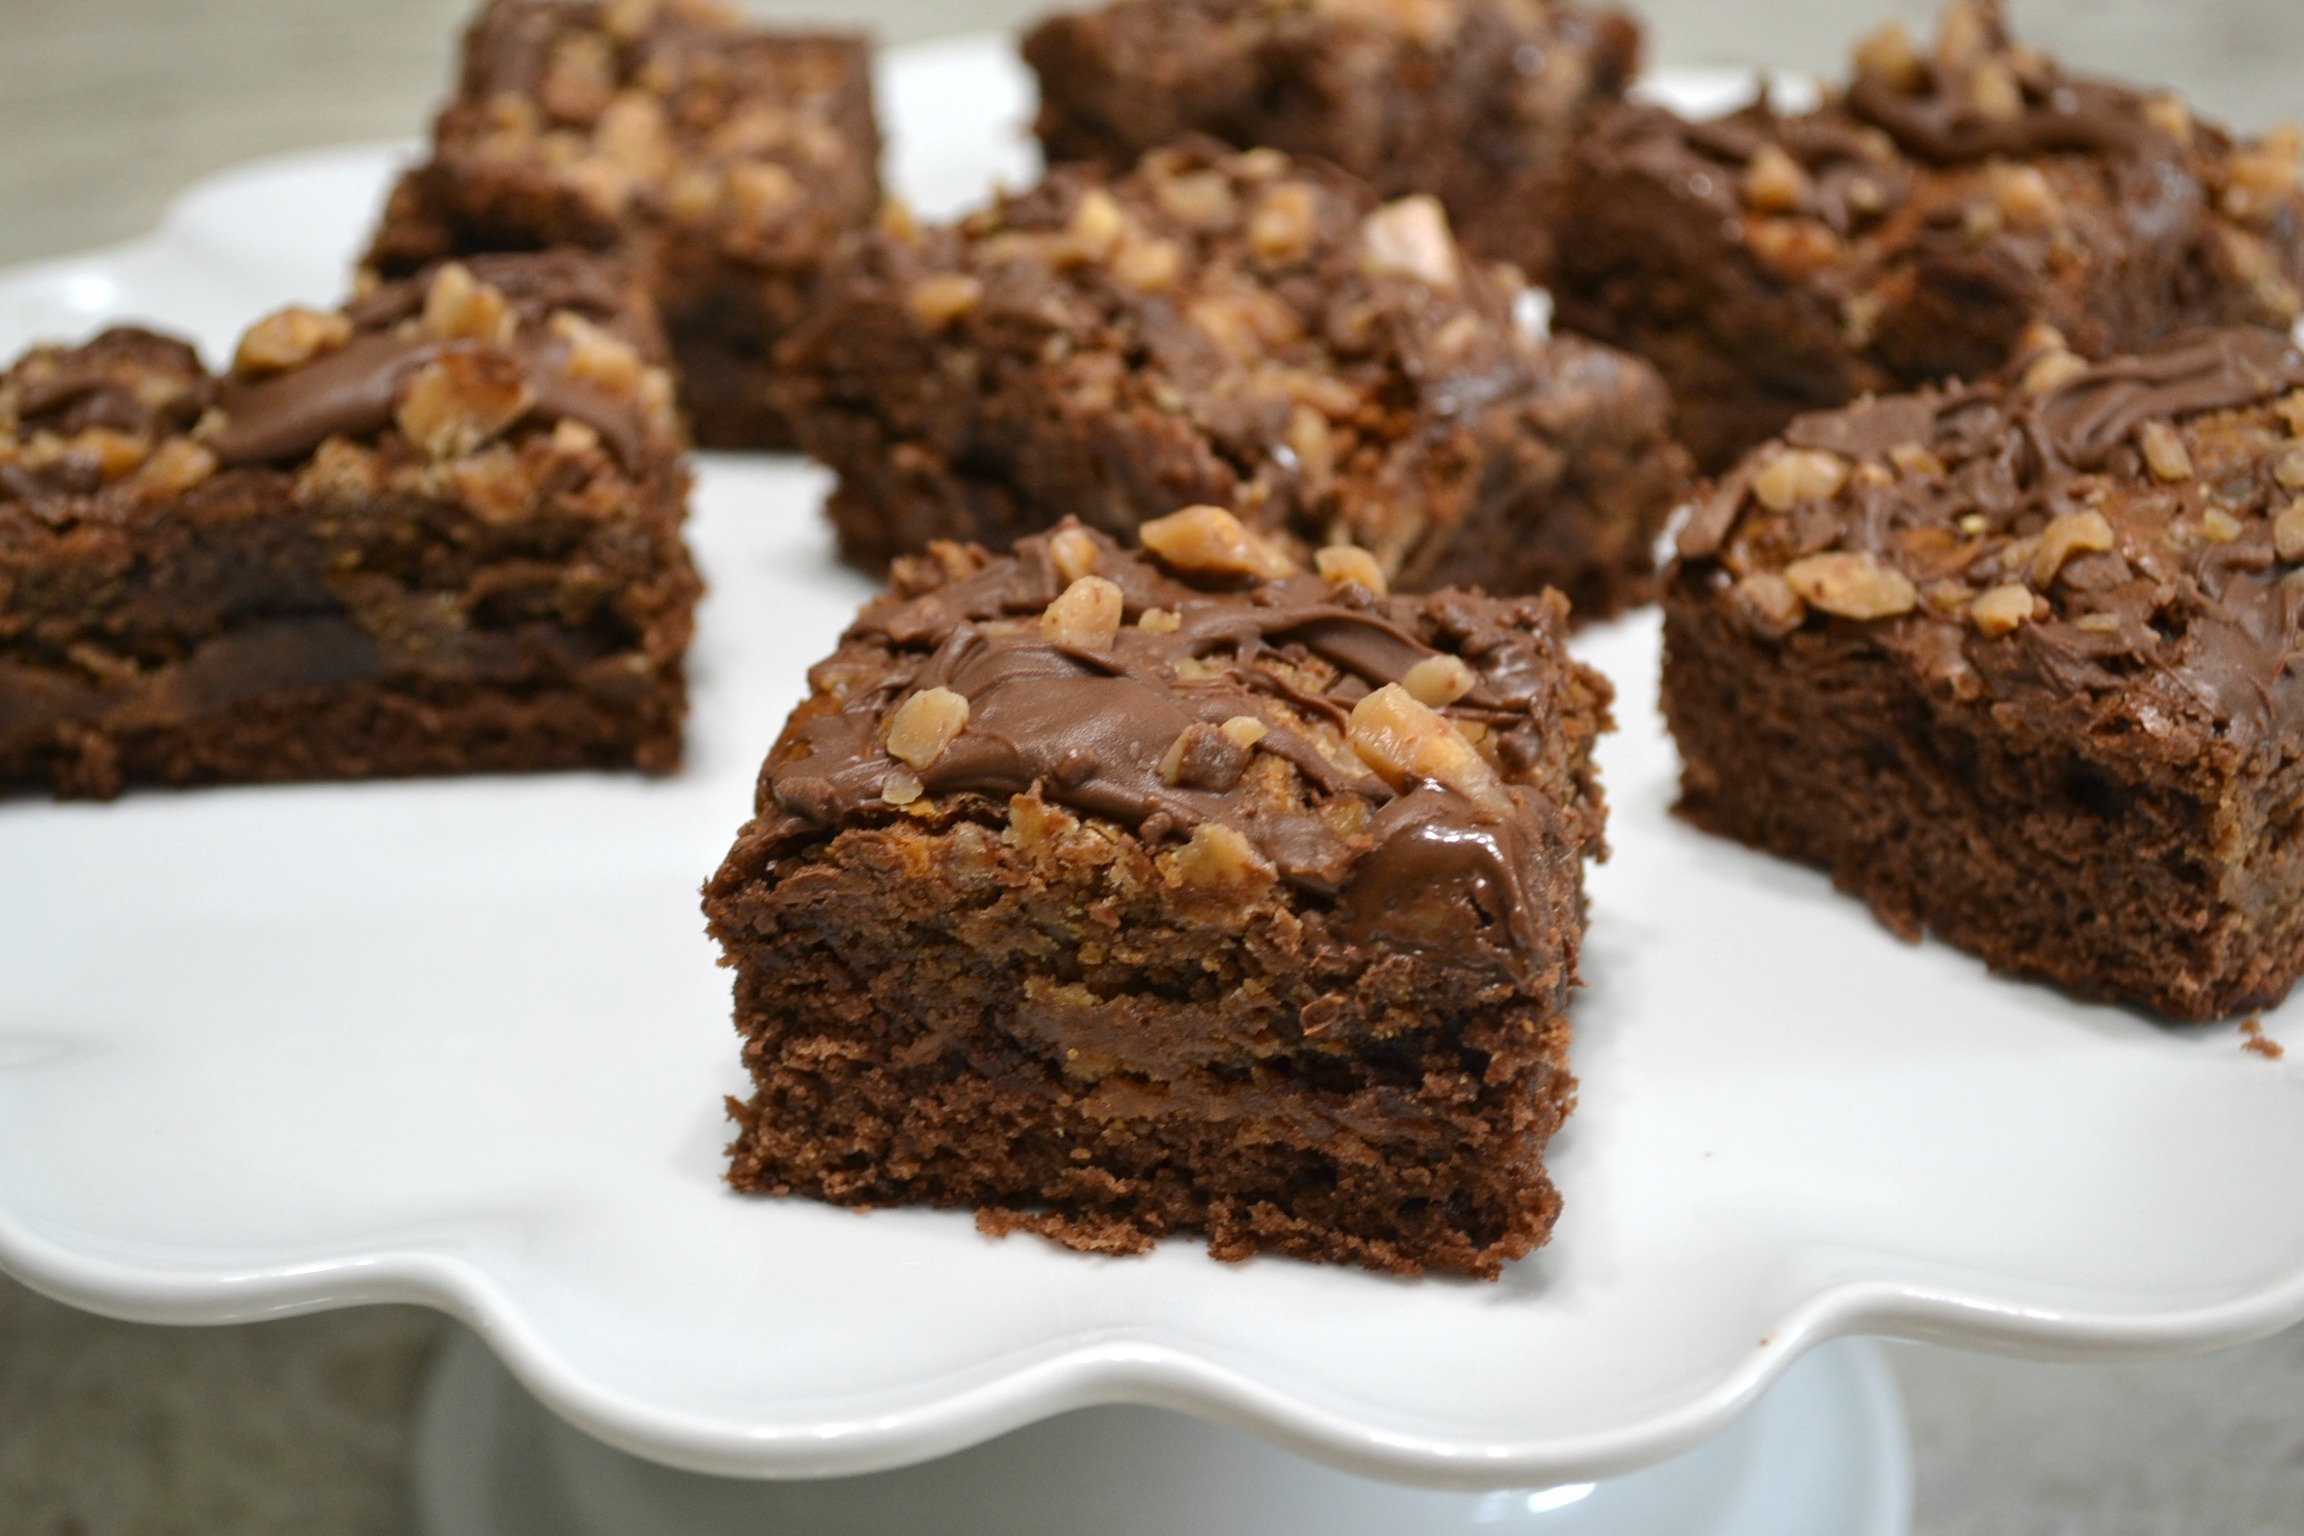 A decadent brownie dessert made with a can of chocolate flavored sweetened condensed milk, peanut butter, and toffee bits